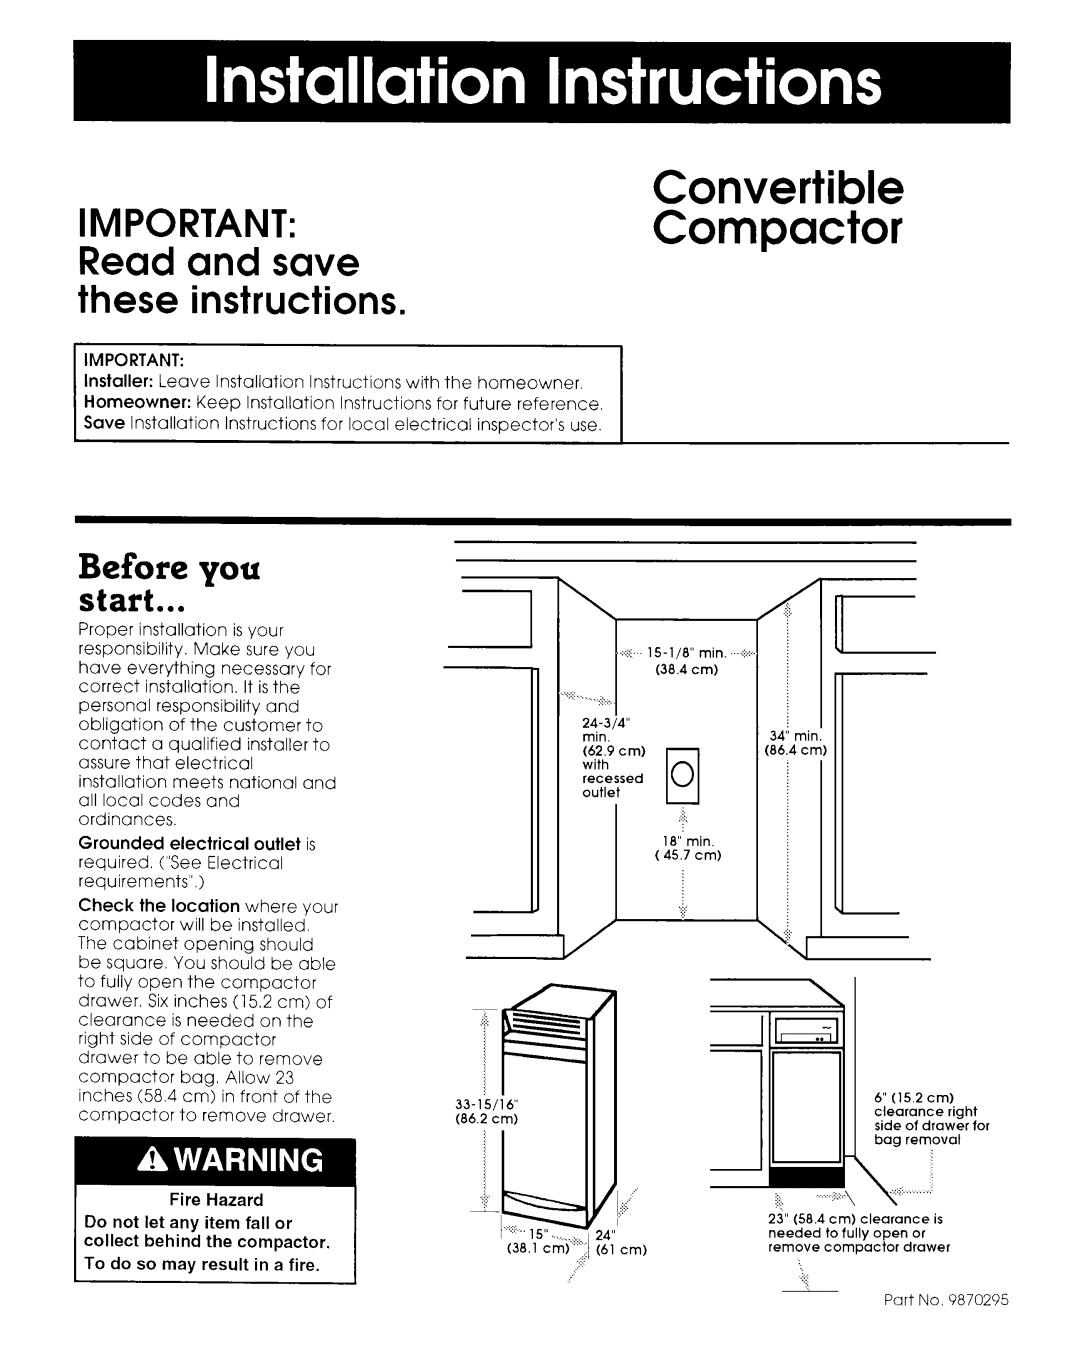 KitchenAid compactor installation instructions IMPORTANT Read and save these instructions, Before you start 